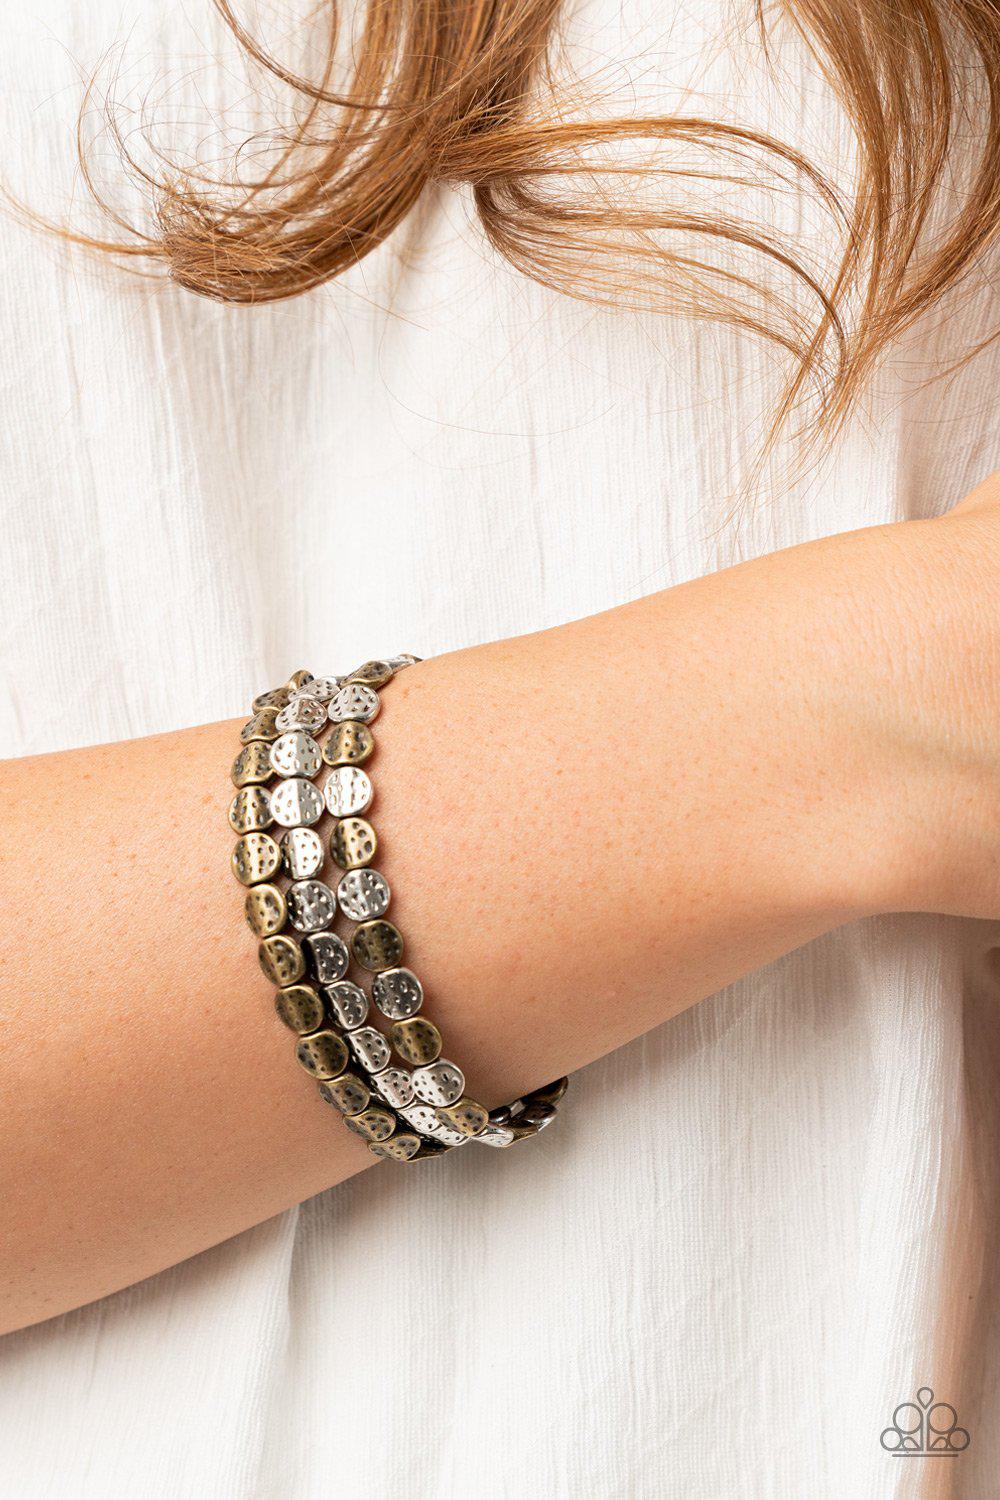 Hammered Heirloom Multi Brass and Silver Stretch Bracelet Set - Paparazzi Accessories-CarasShop.com - $5 Jewelry by Cara Jewels